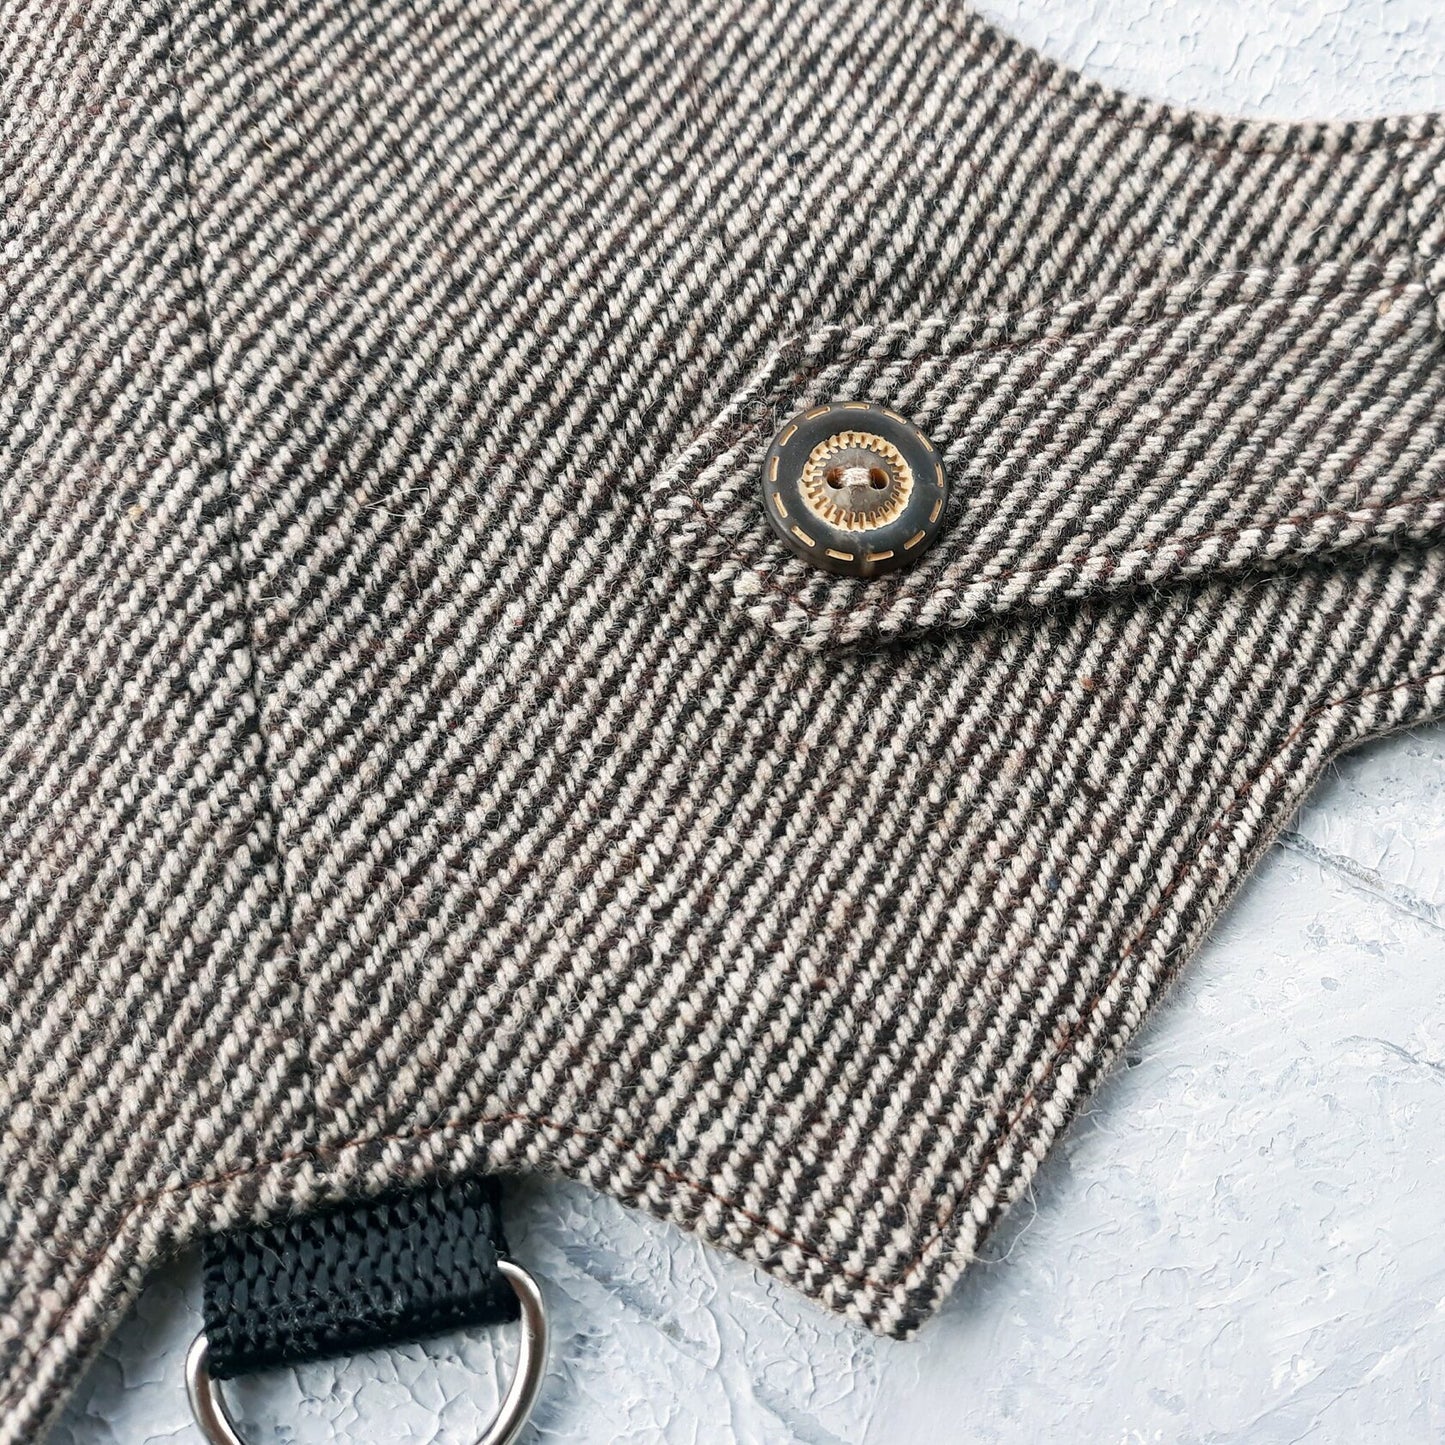 Difficult to escape tweed cat harness with the diagonal stripes pattern and patch. Personalization is available